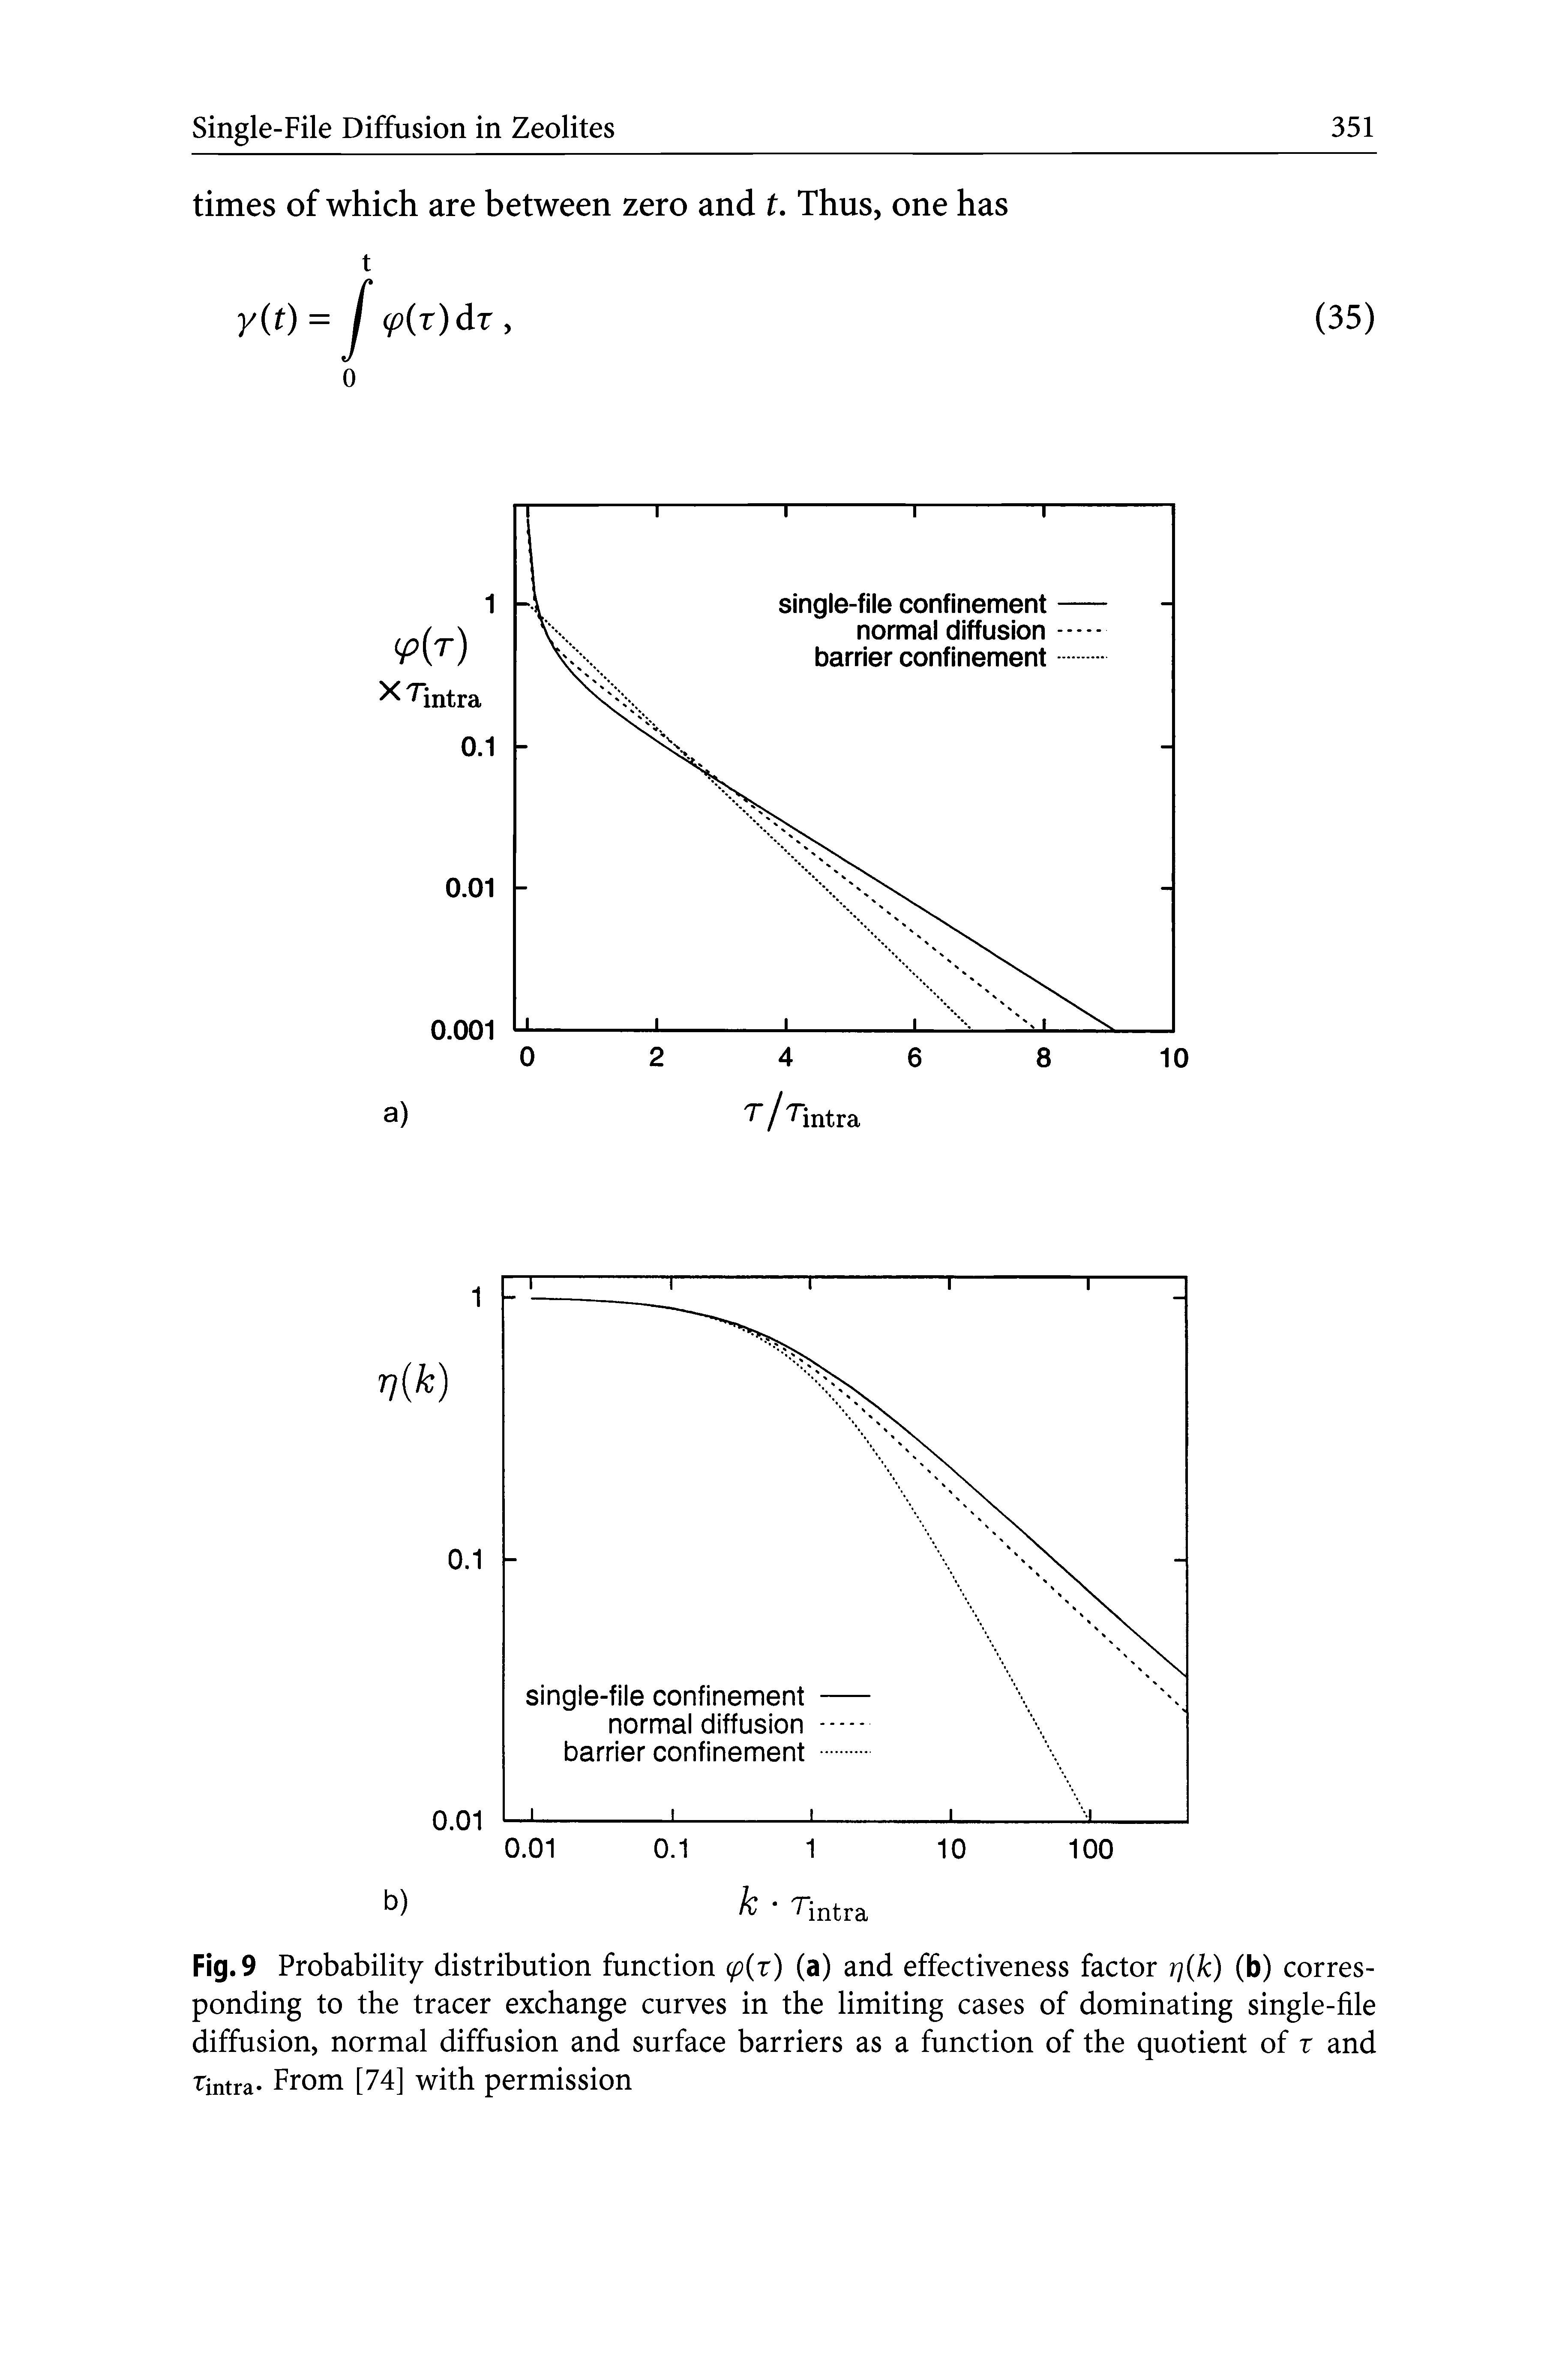 Fig. 9 Probability distribution function (p r) (a) and effectiveness factor rj k) (b) corresponding to the tracer exchange curves in the limiting cases of dominating single-file diffusion, normal diffusion and surface barriers as a function of the quotient of r and Tintra- From [74] with permission...